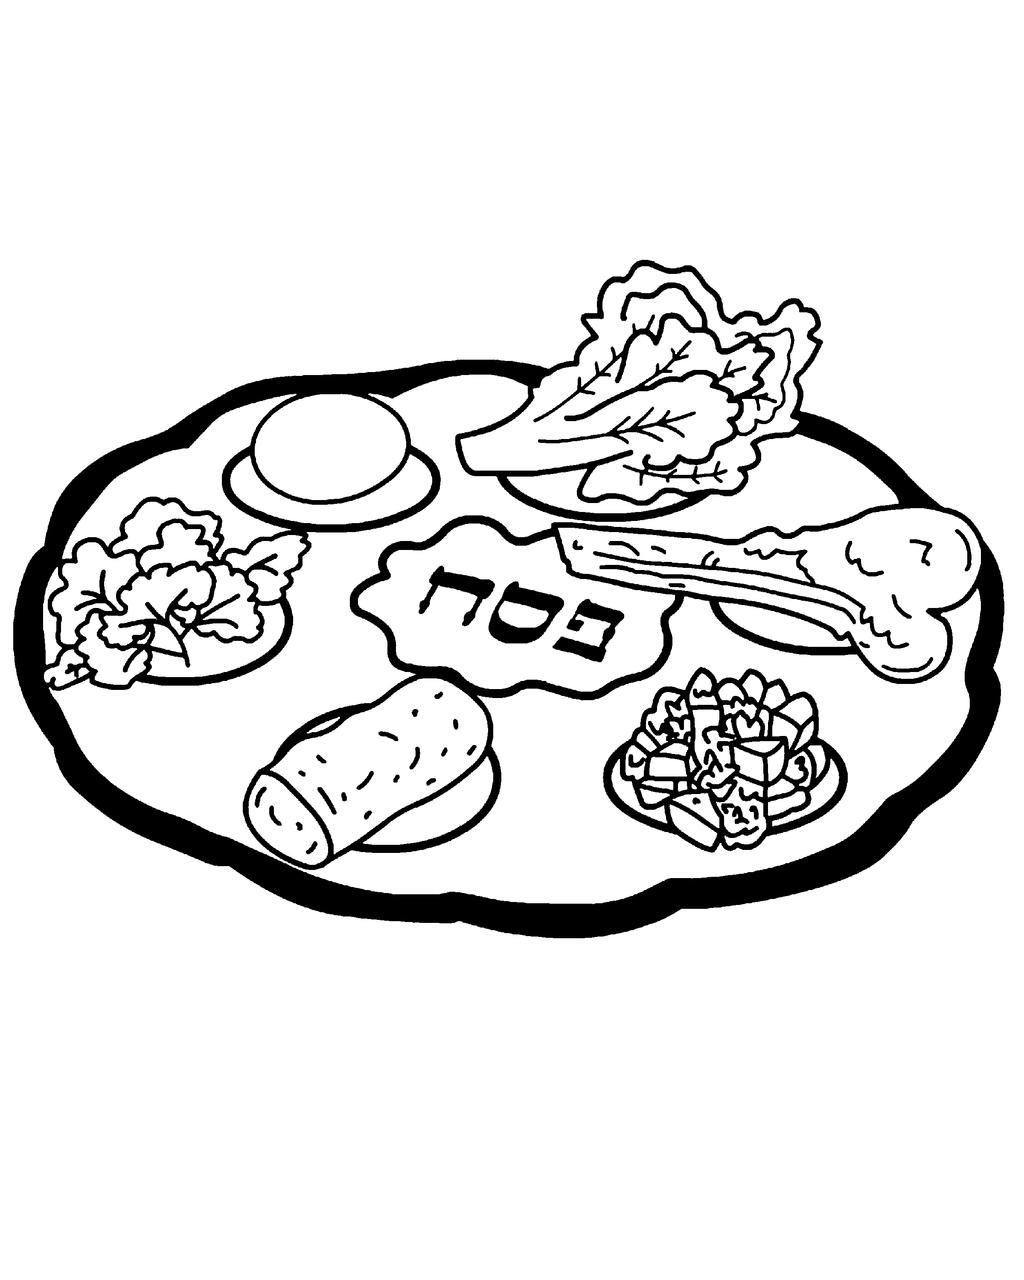 Seder Plate Seder plate, Seder plate, different from the other plates Youʼve got a lot more going on design wise Seder plate, Seder plate, youʼre a very special plate I broke all my other plates but